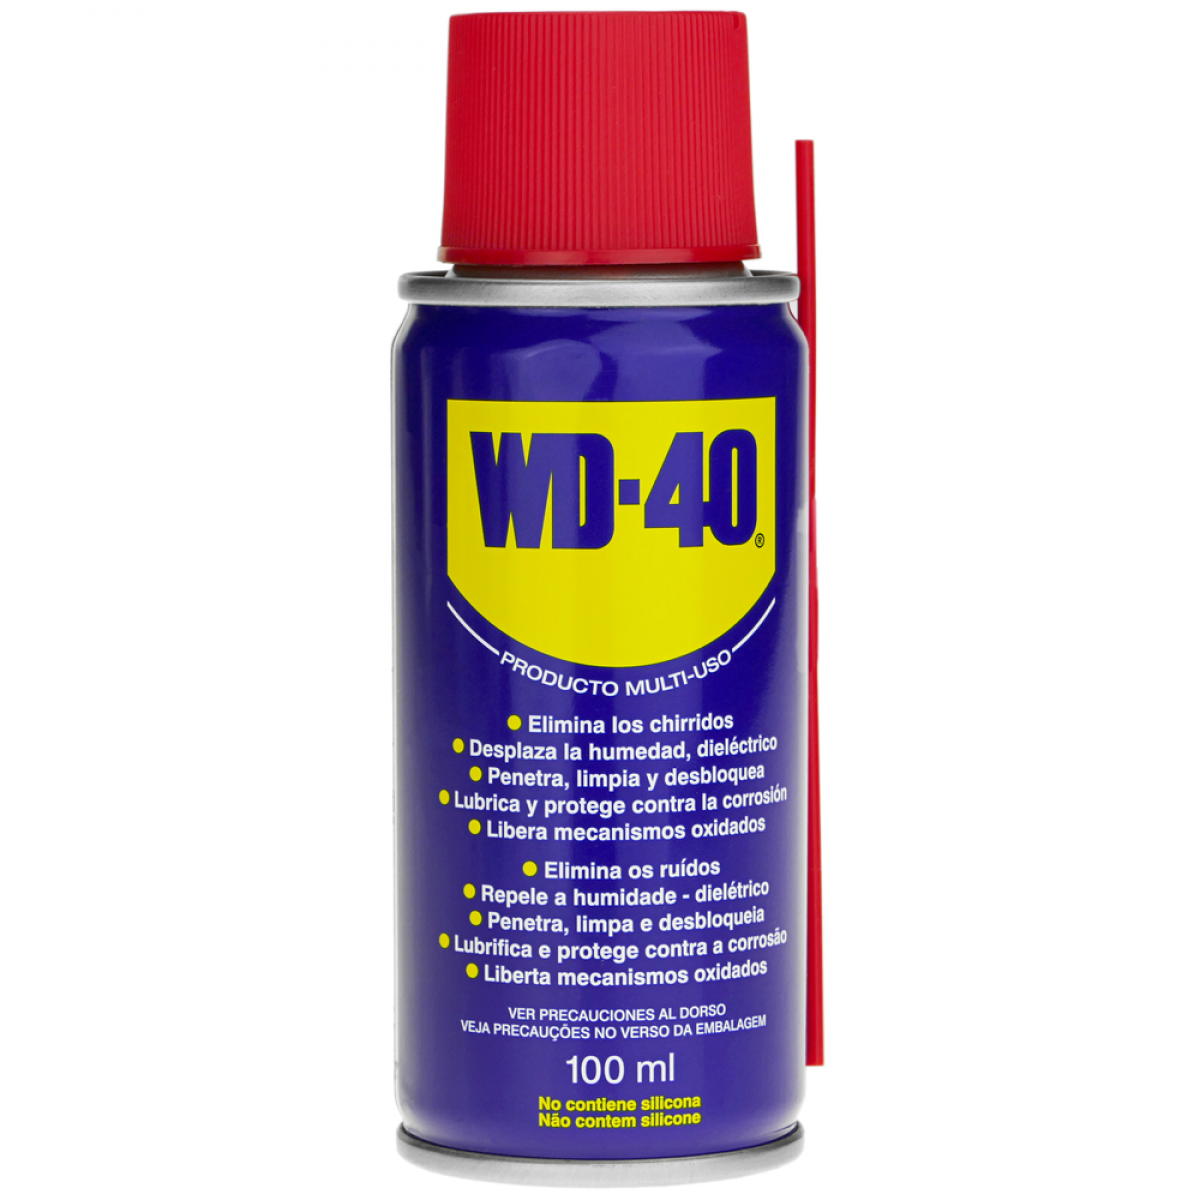 Wd-40 - Spray lubrifiant polyvalent 100 ml - Mastic, silicone, joint